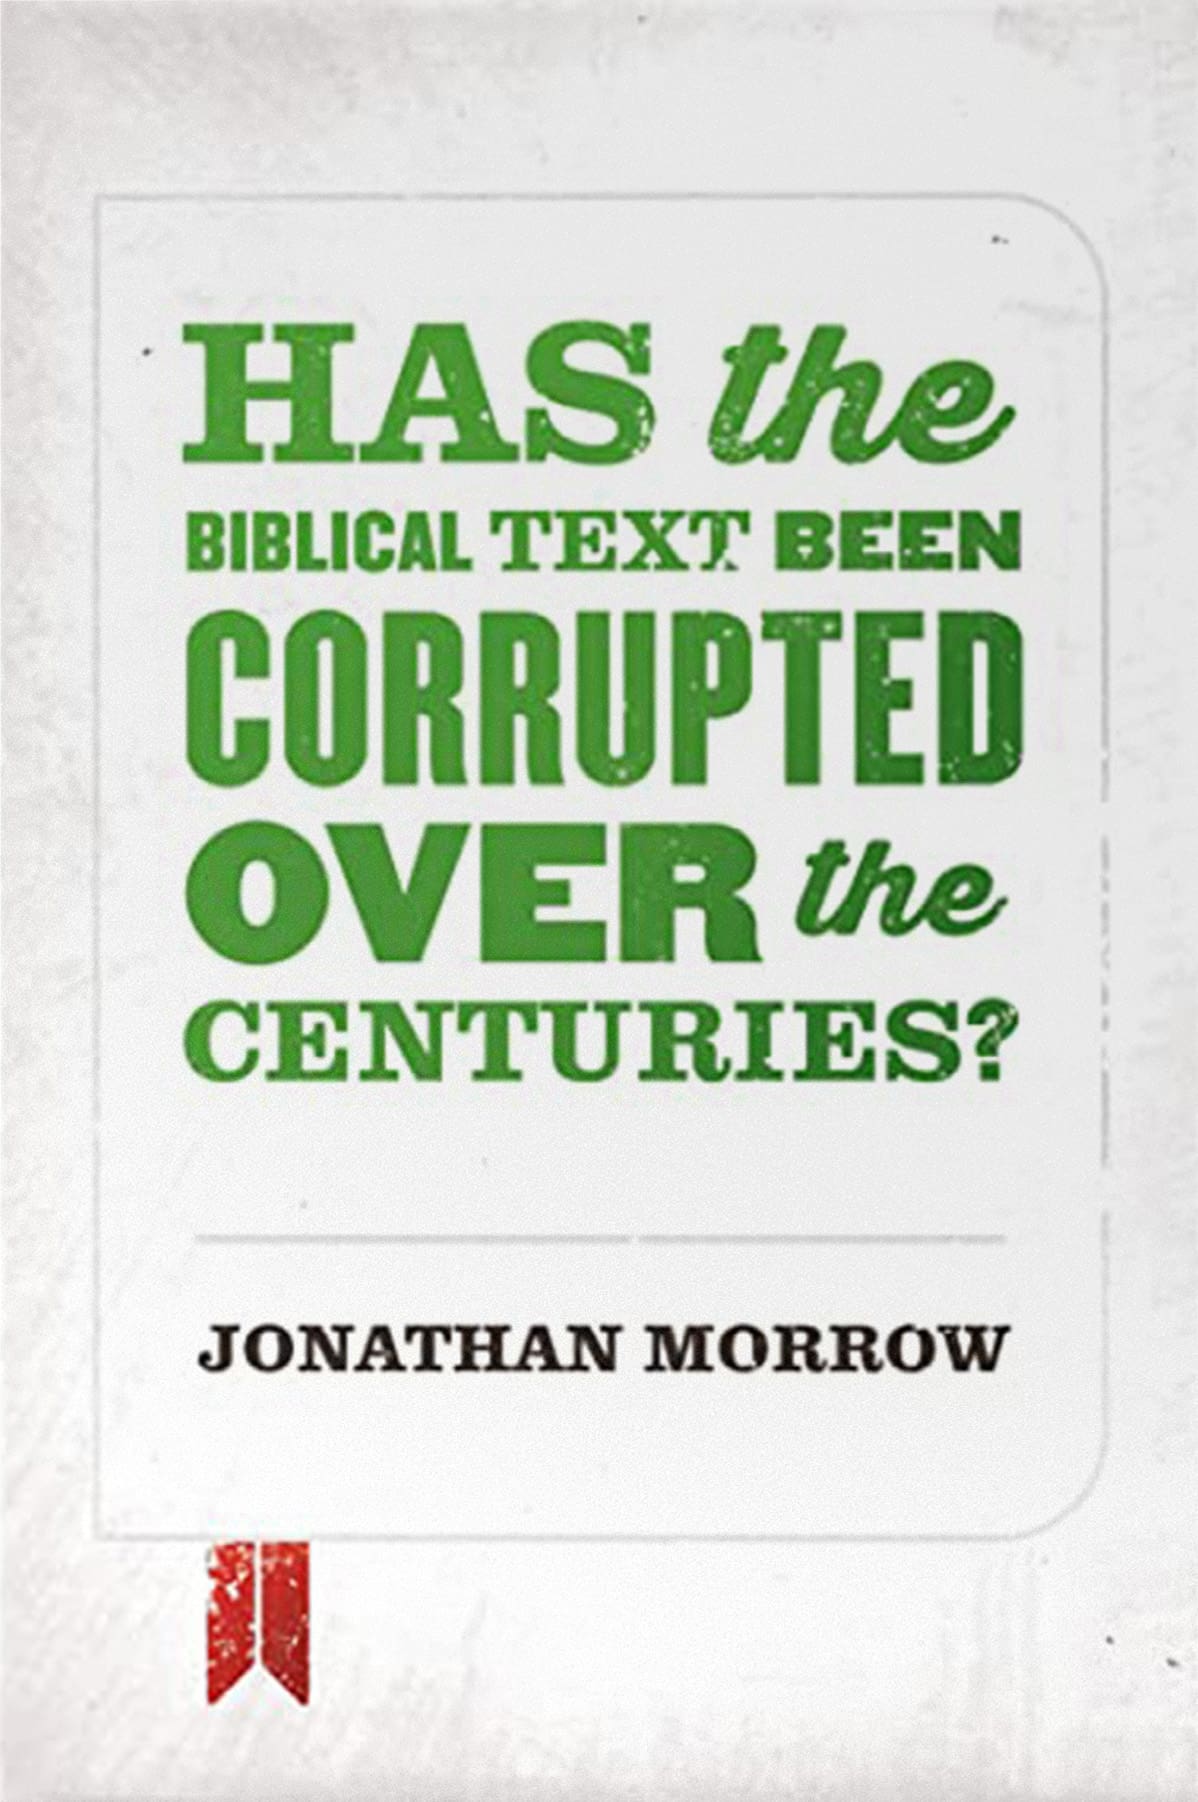 bible-text-corrupted2